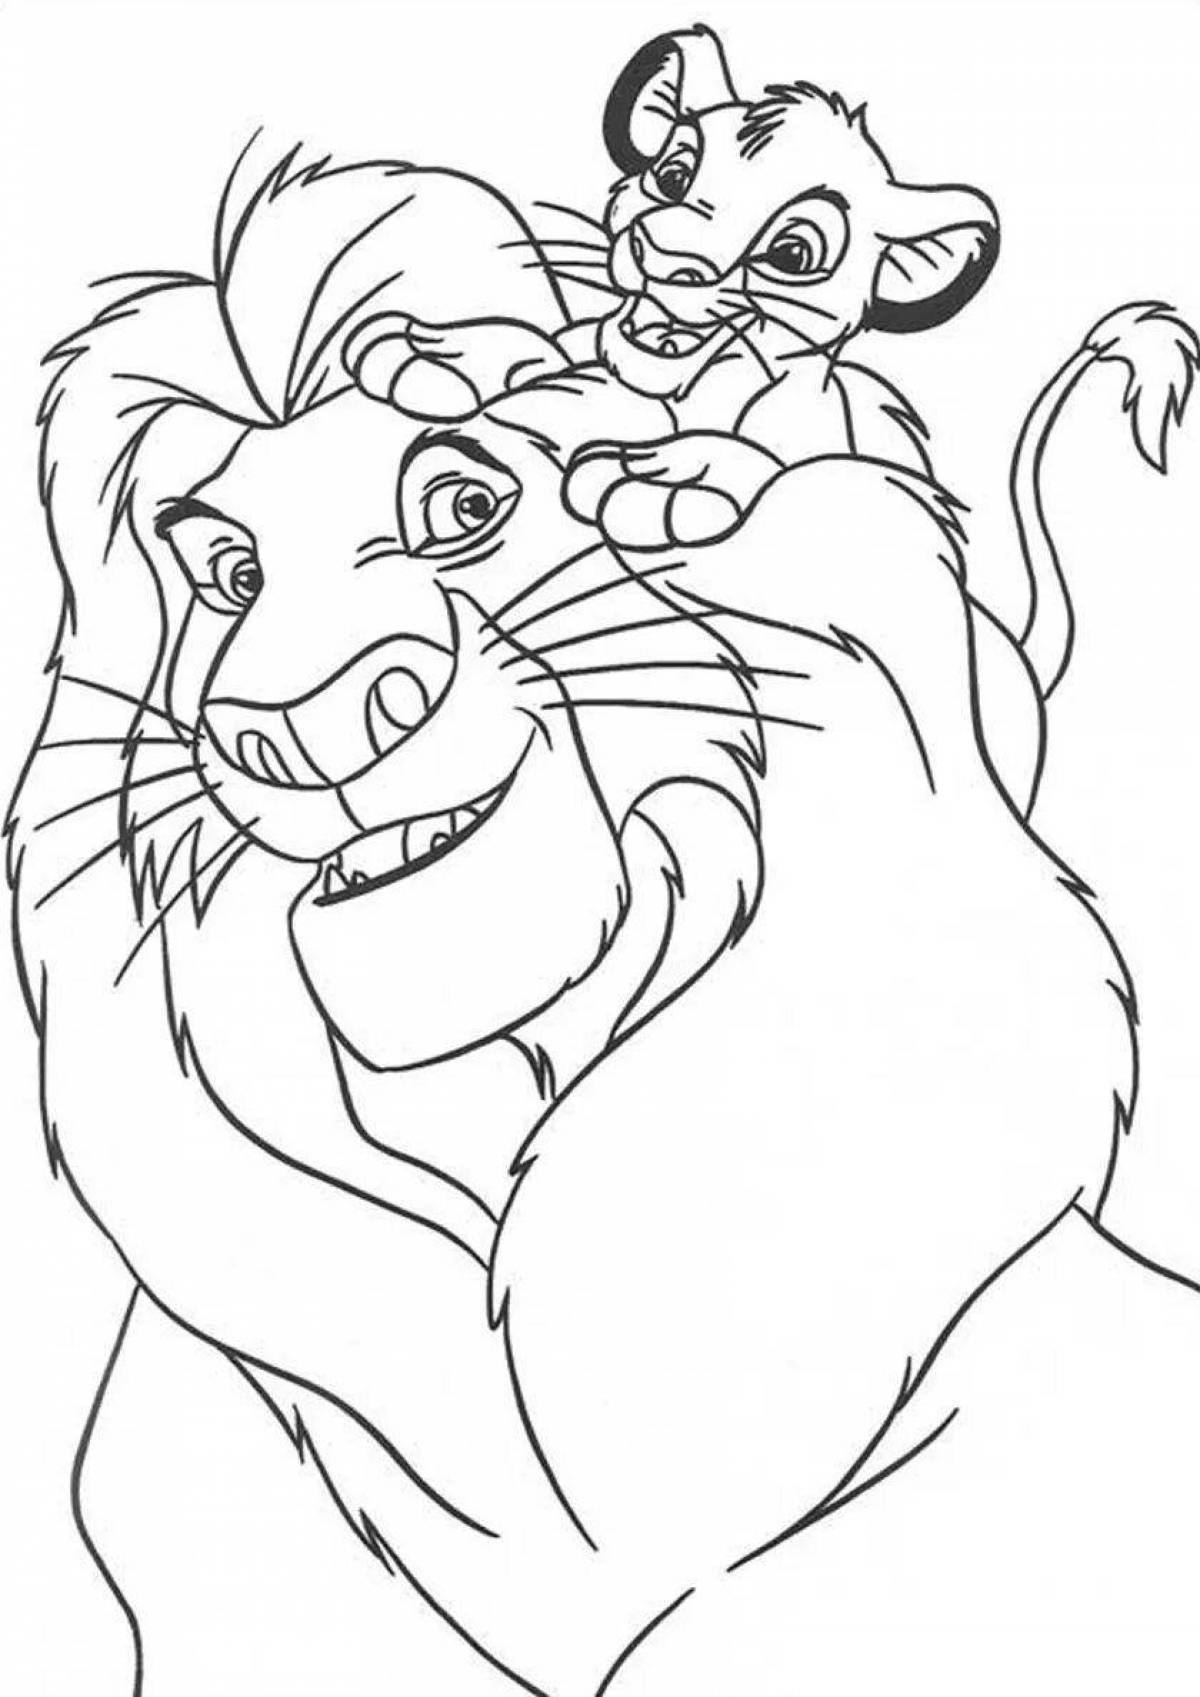 Simba coloring book for kids